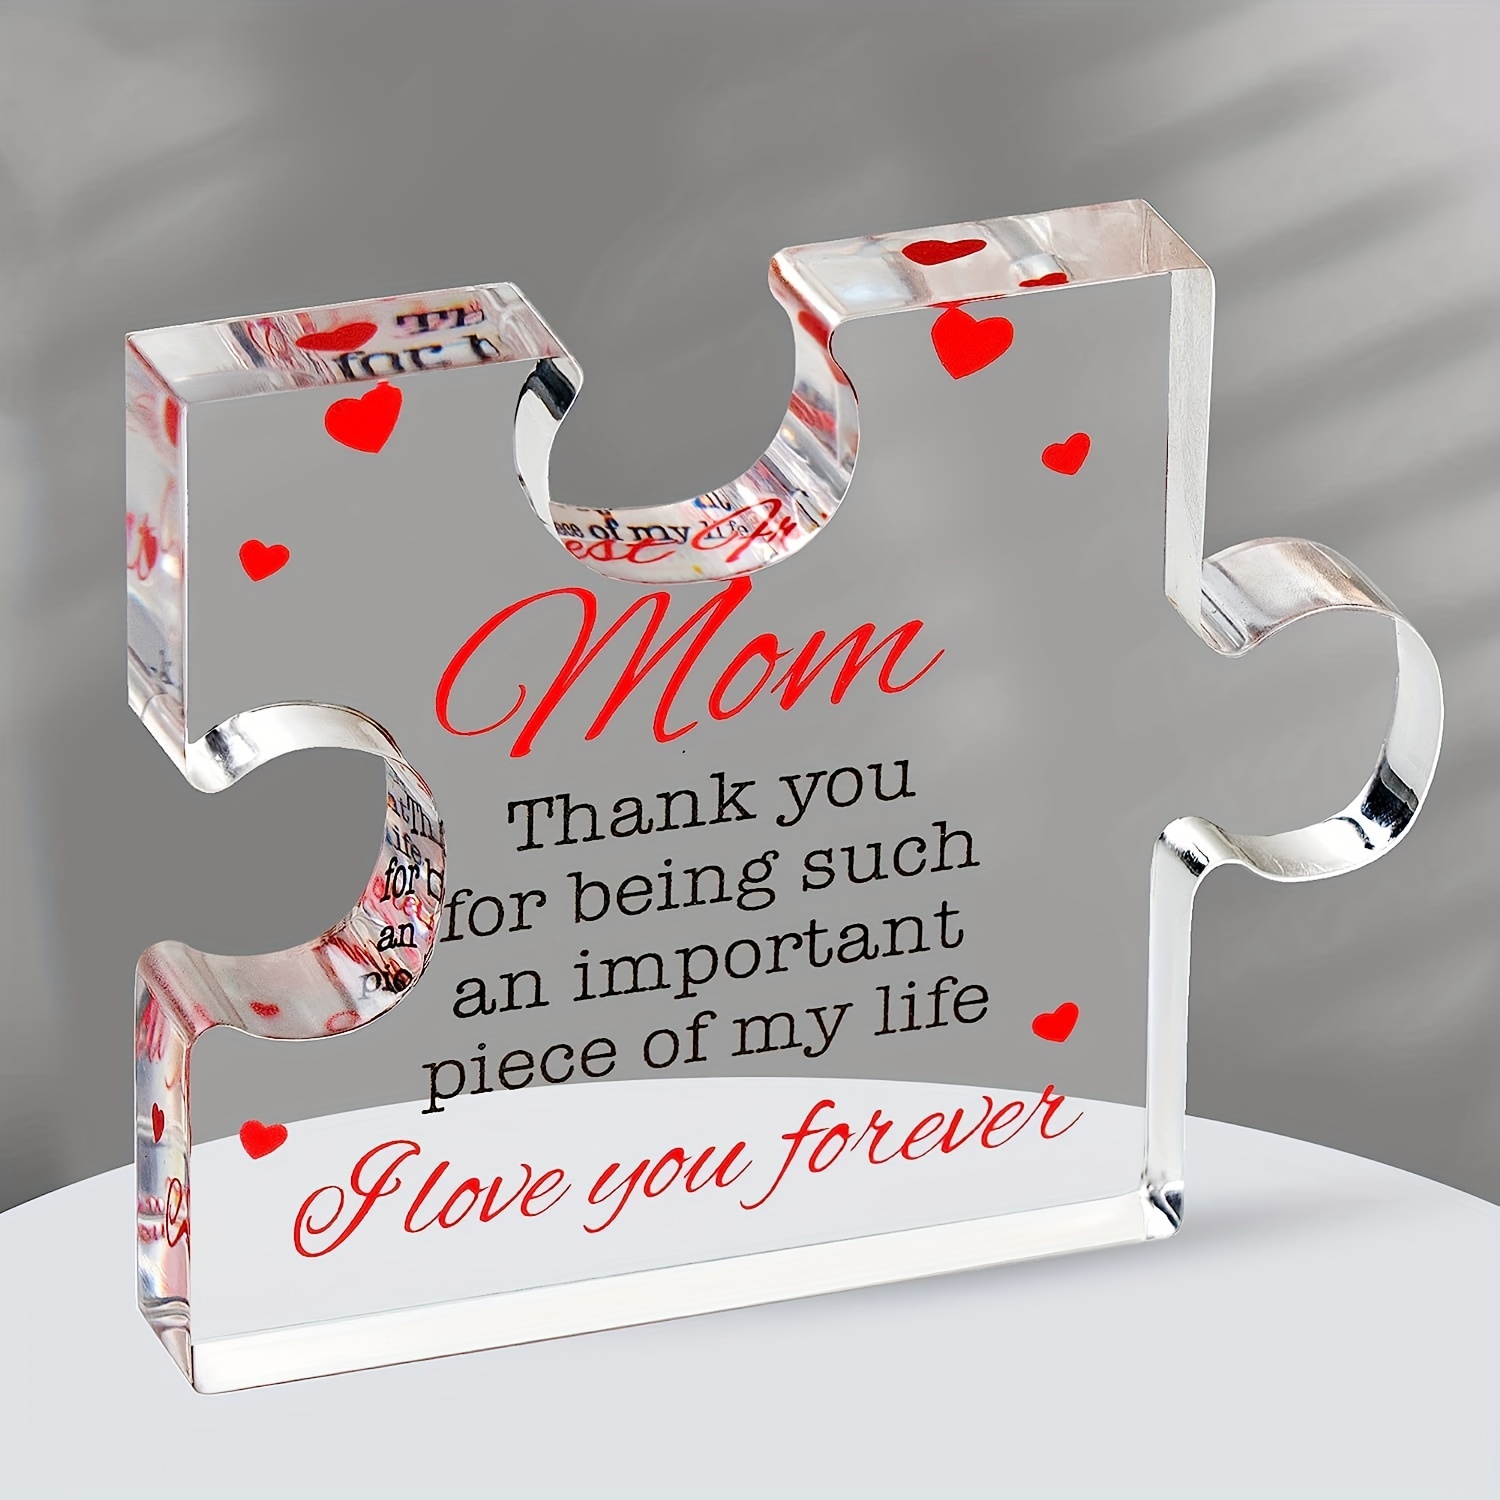 Birthday Gifts for Mom - Engraved Acrylic Block Puzzle Mom Present 4.1 x  3.5 inch - Cool Mom Presents from Daughter, Son, Dad - Heartwarming Mom